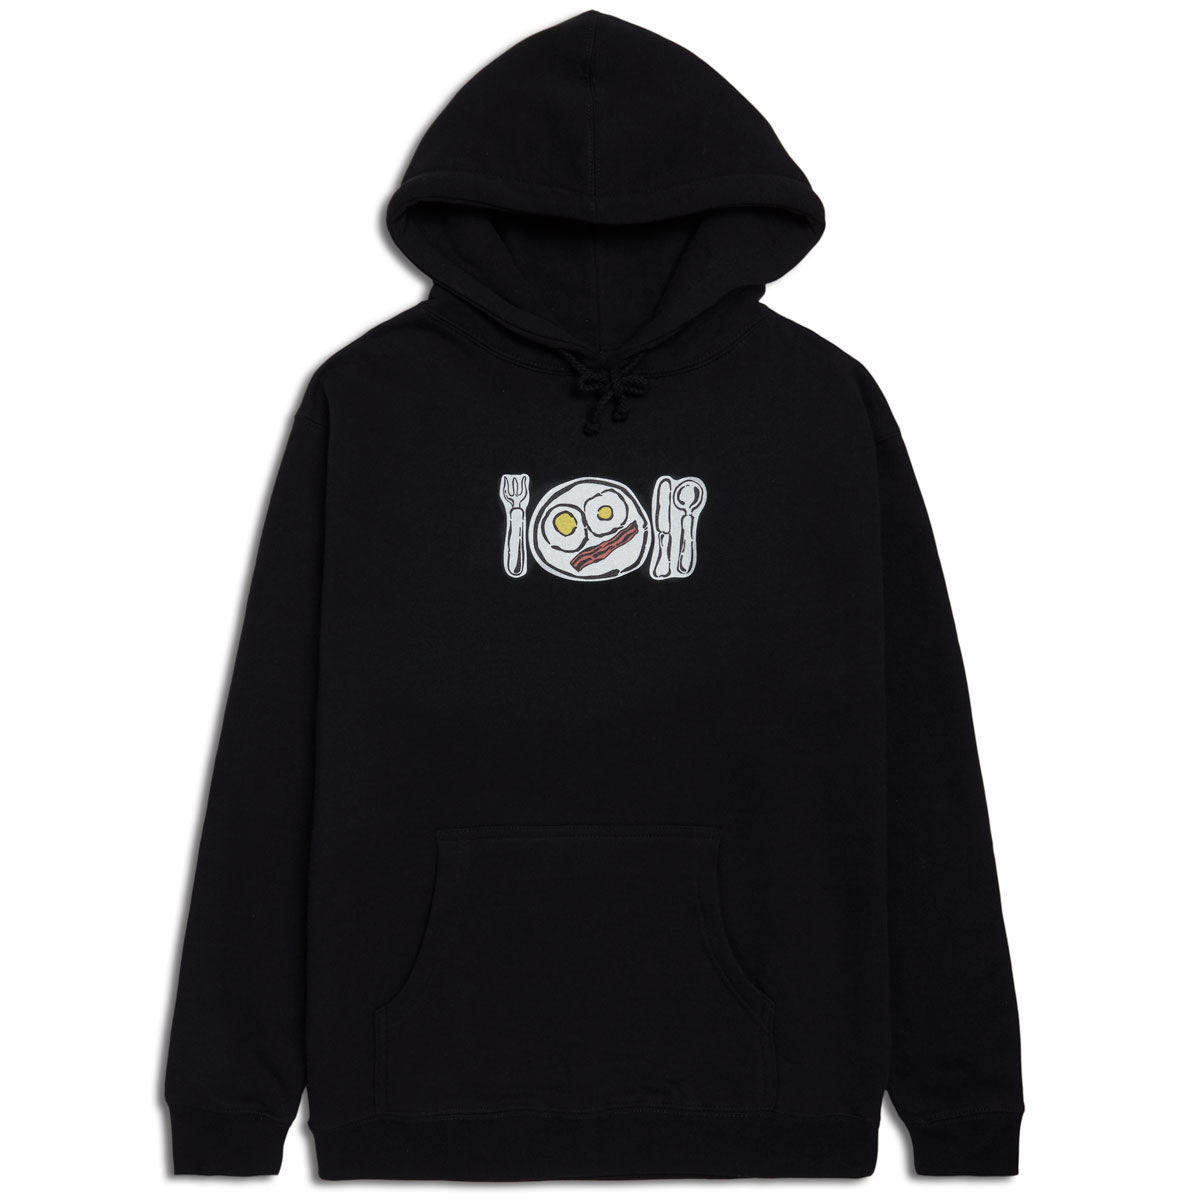 CCS Over Easy Hoodie - Black - MD image 1